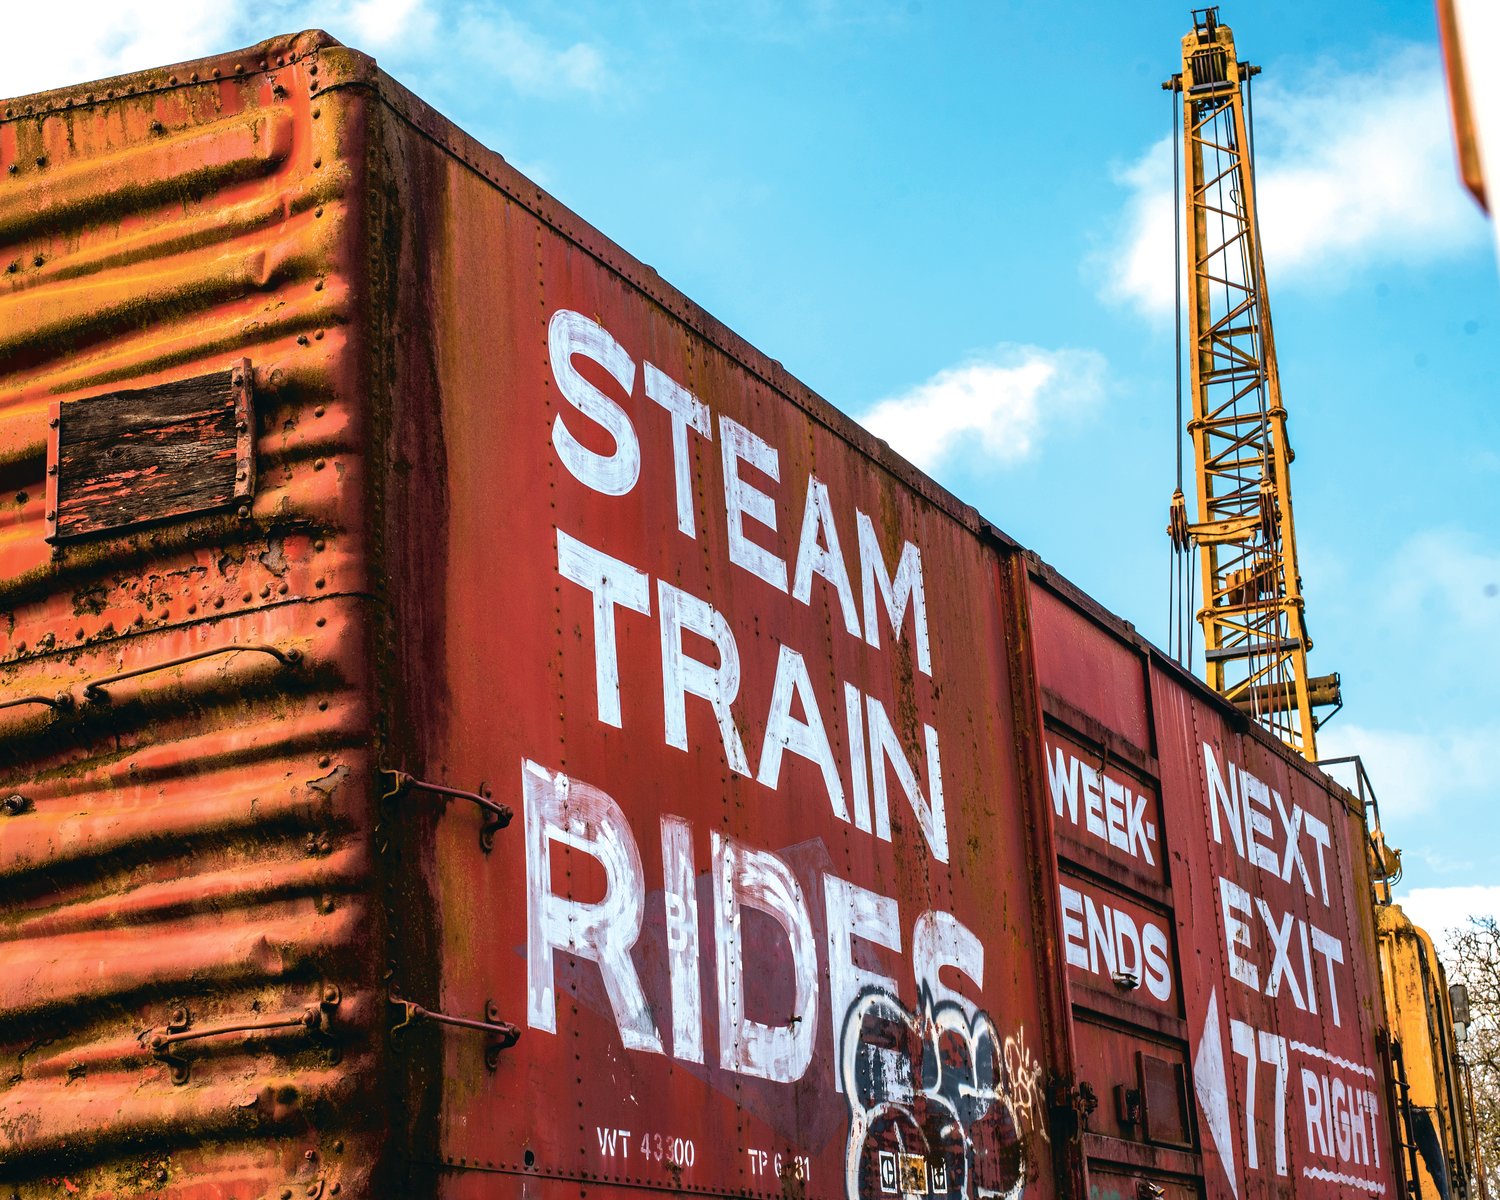 Train cars advertise steam train rides in Chehalis on Wednesday.